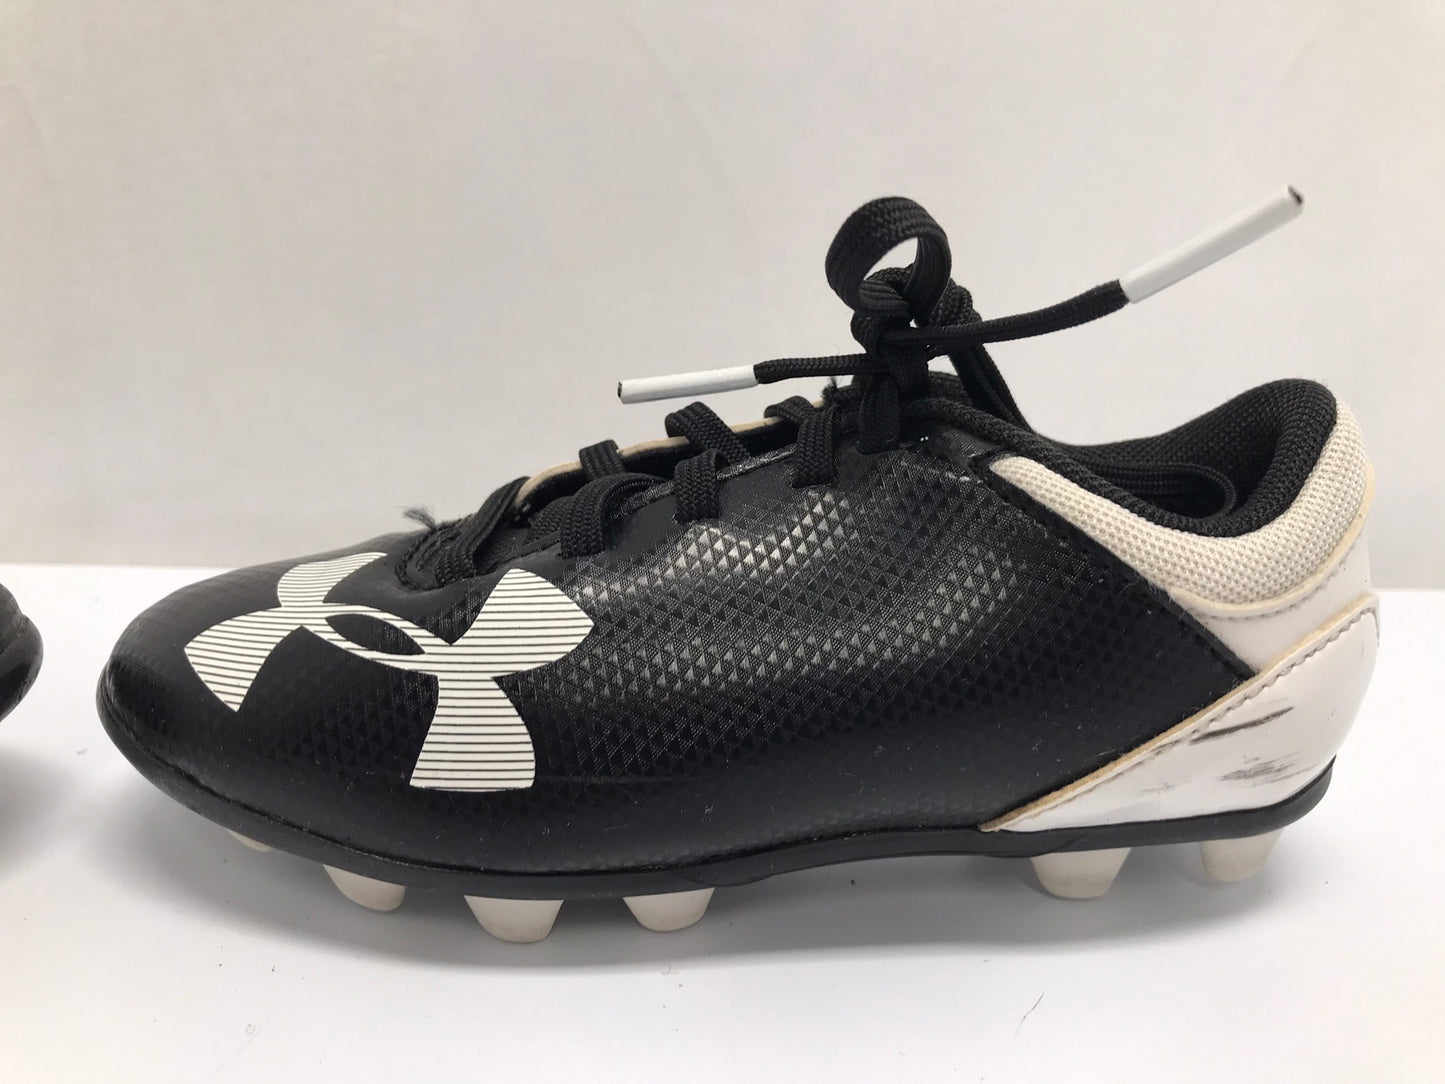 Soccer Shoes Cleats Child Size 10 Toddler Under Armour Black White Excellent